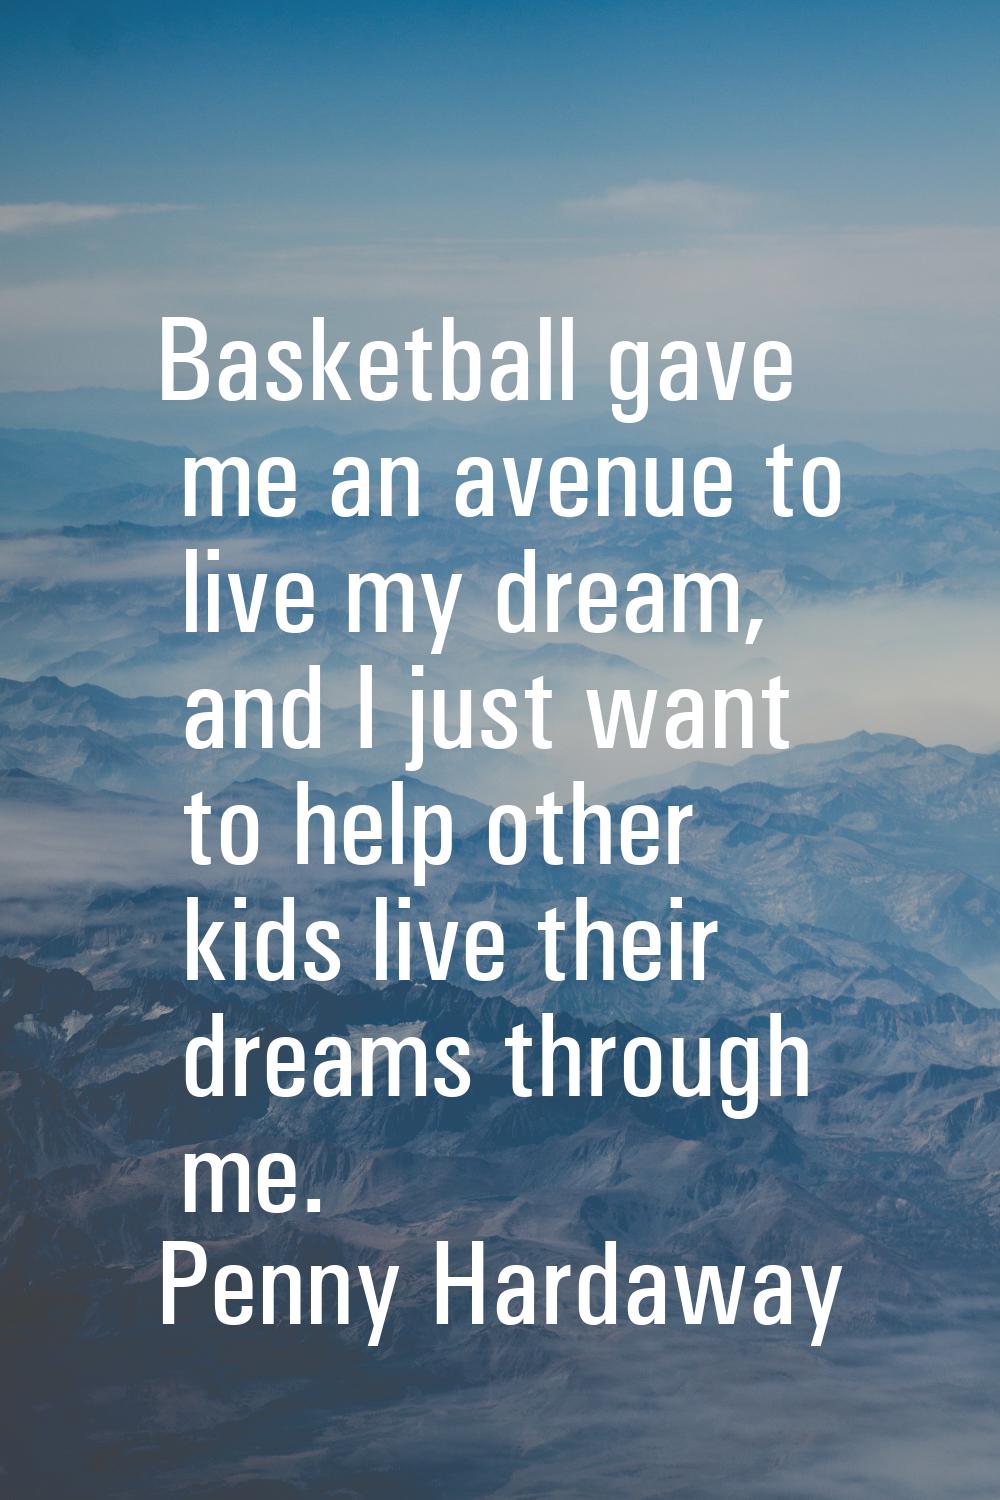 Basketball gave me an avenue to live my dream, and I just want to help other kids live their dreams